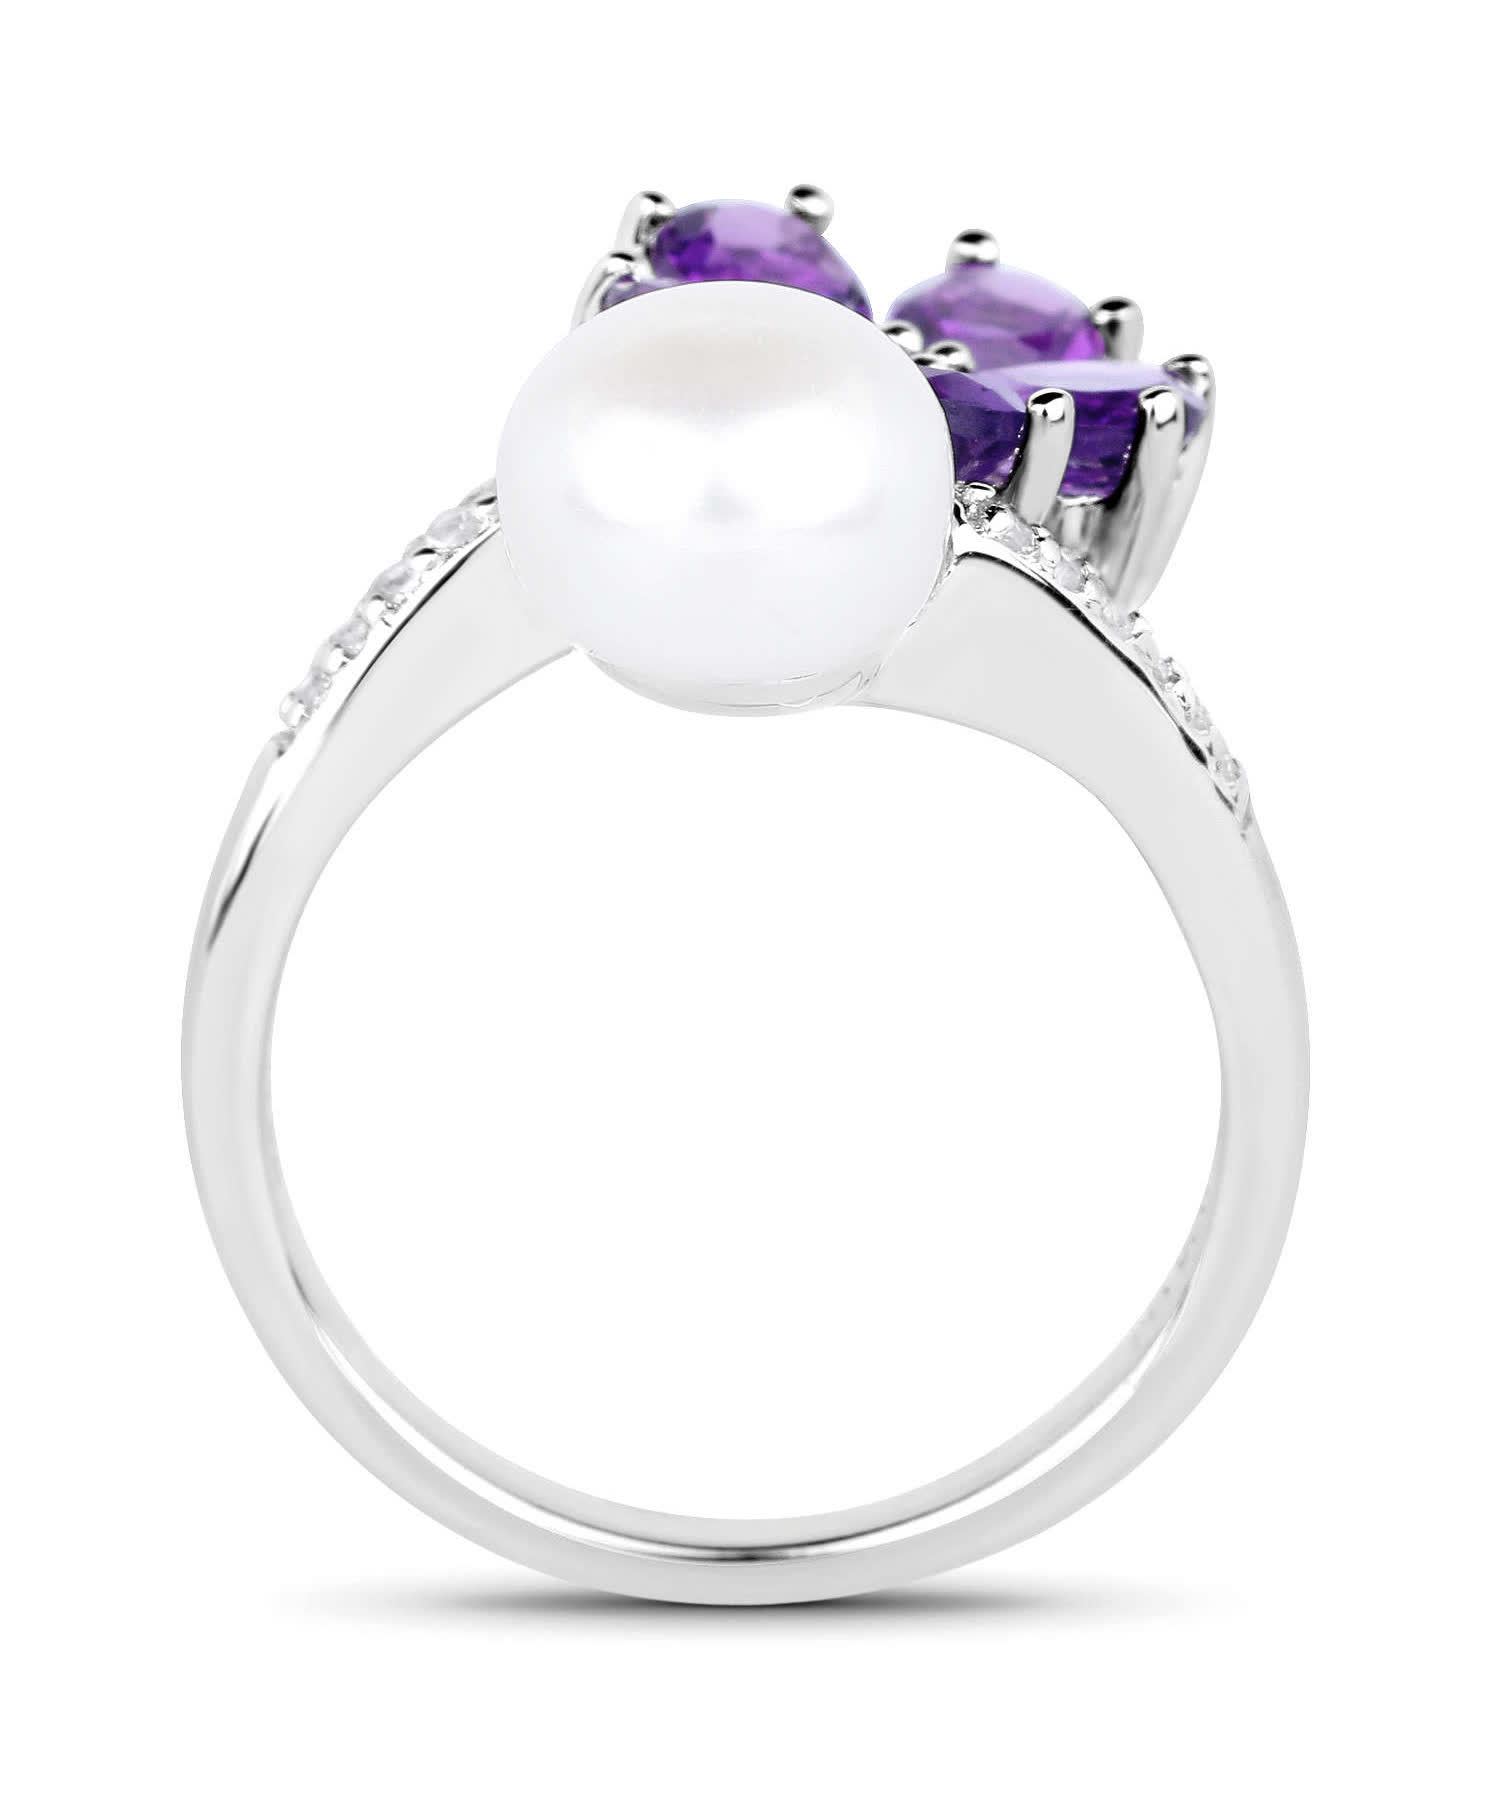 1.59ctw Natural Amethyst, White Freshwater Pearl and Zircon Rhodium Plated 925 Sterling Silver Flower Ring View 2